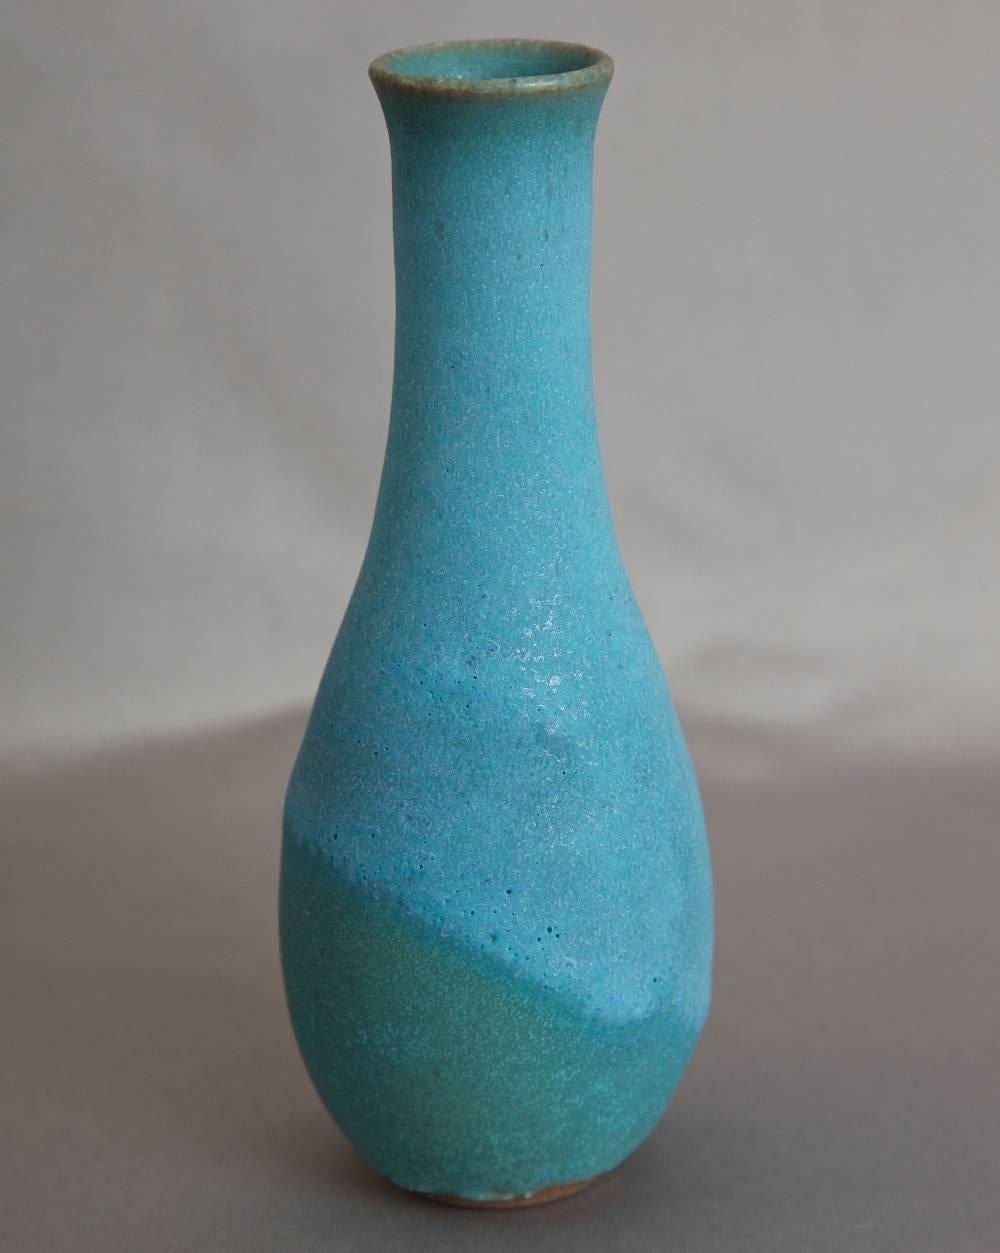 Sandra Zeenni.
“Turquoise Phimp”, 2014.
Small stoneware vessel with matte turquoise glaze.
Signed SaZe.

Based in Paris, Sandra's work has been included in museum exhibitions, recently 